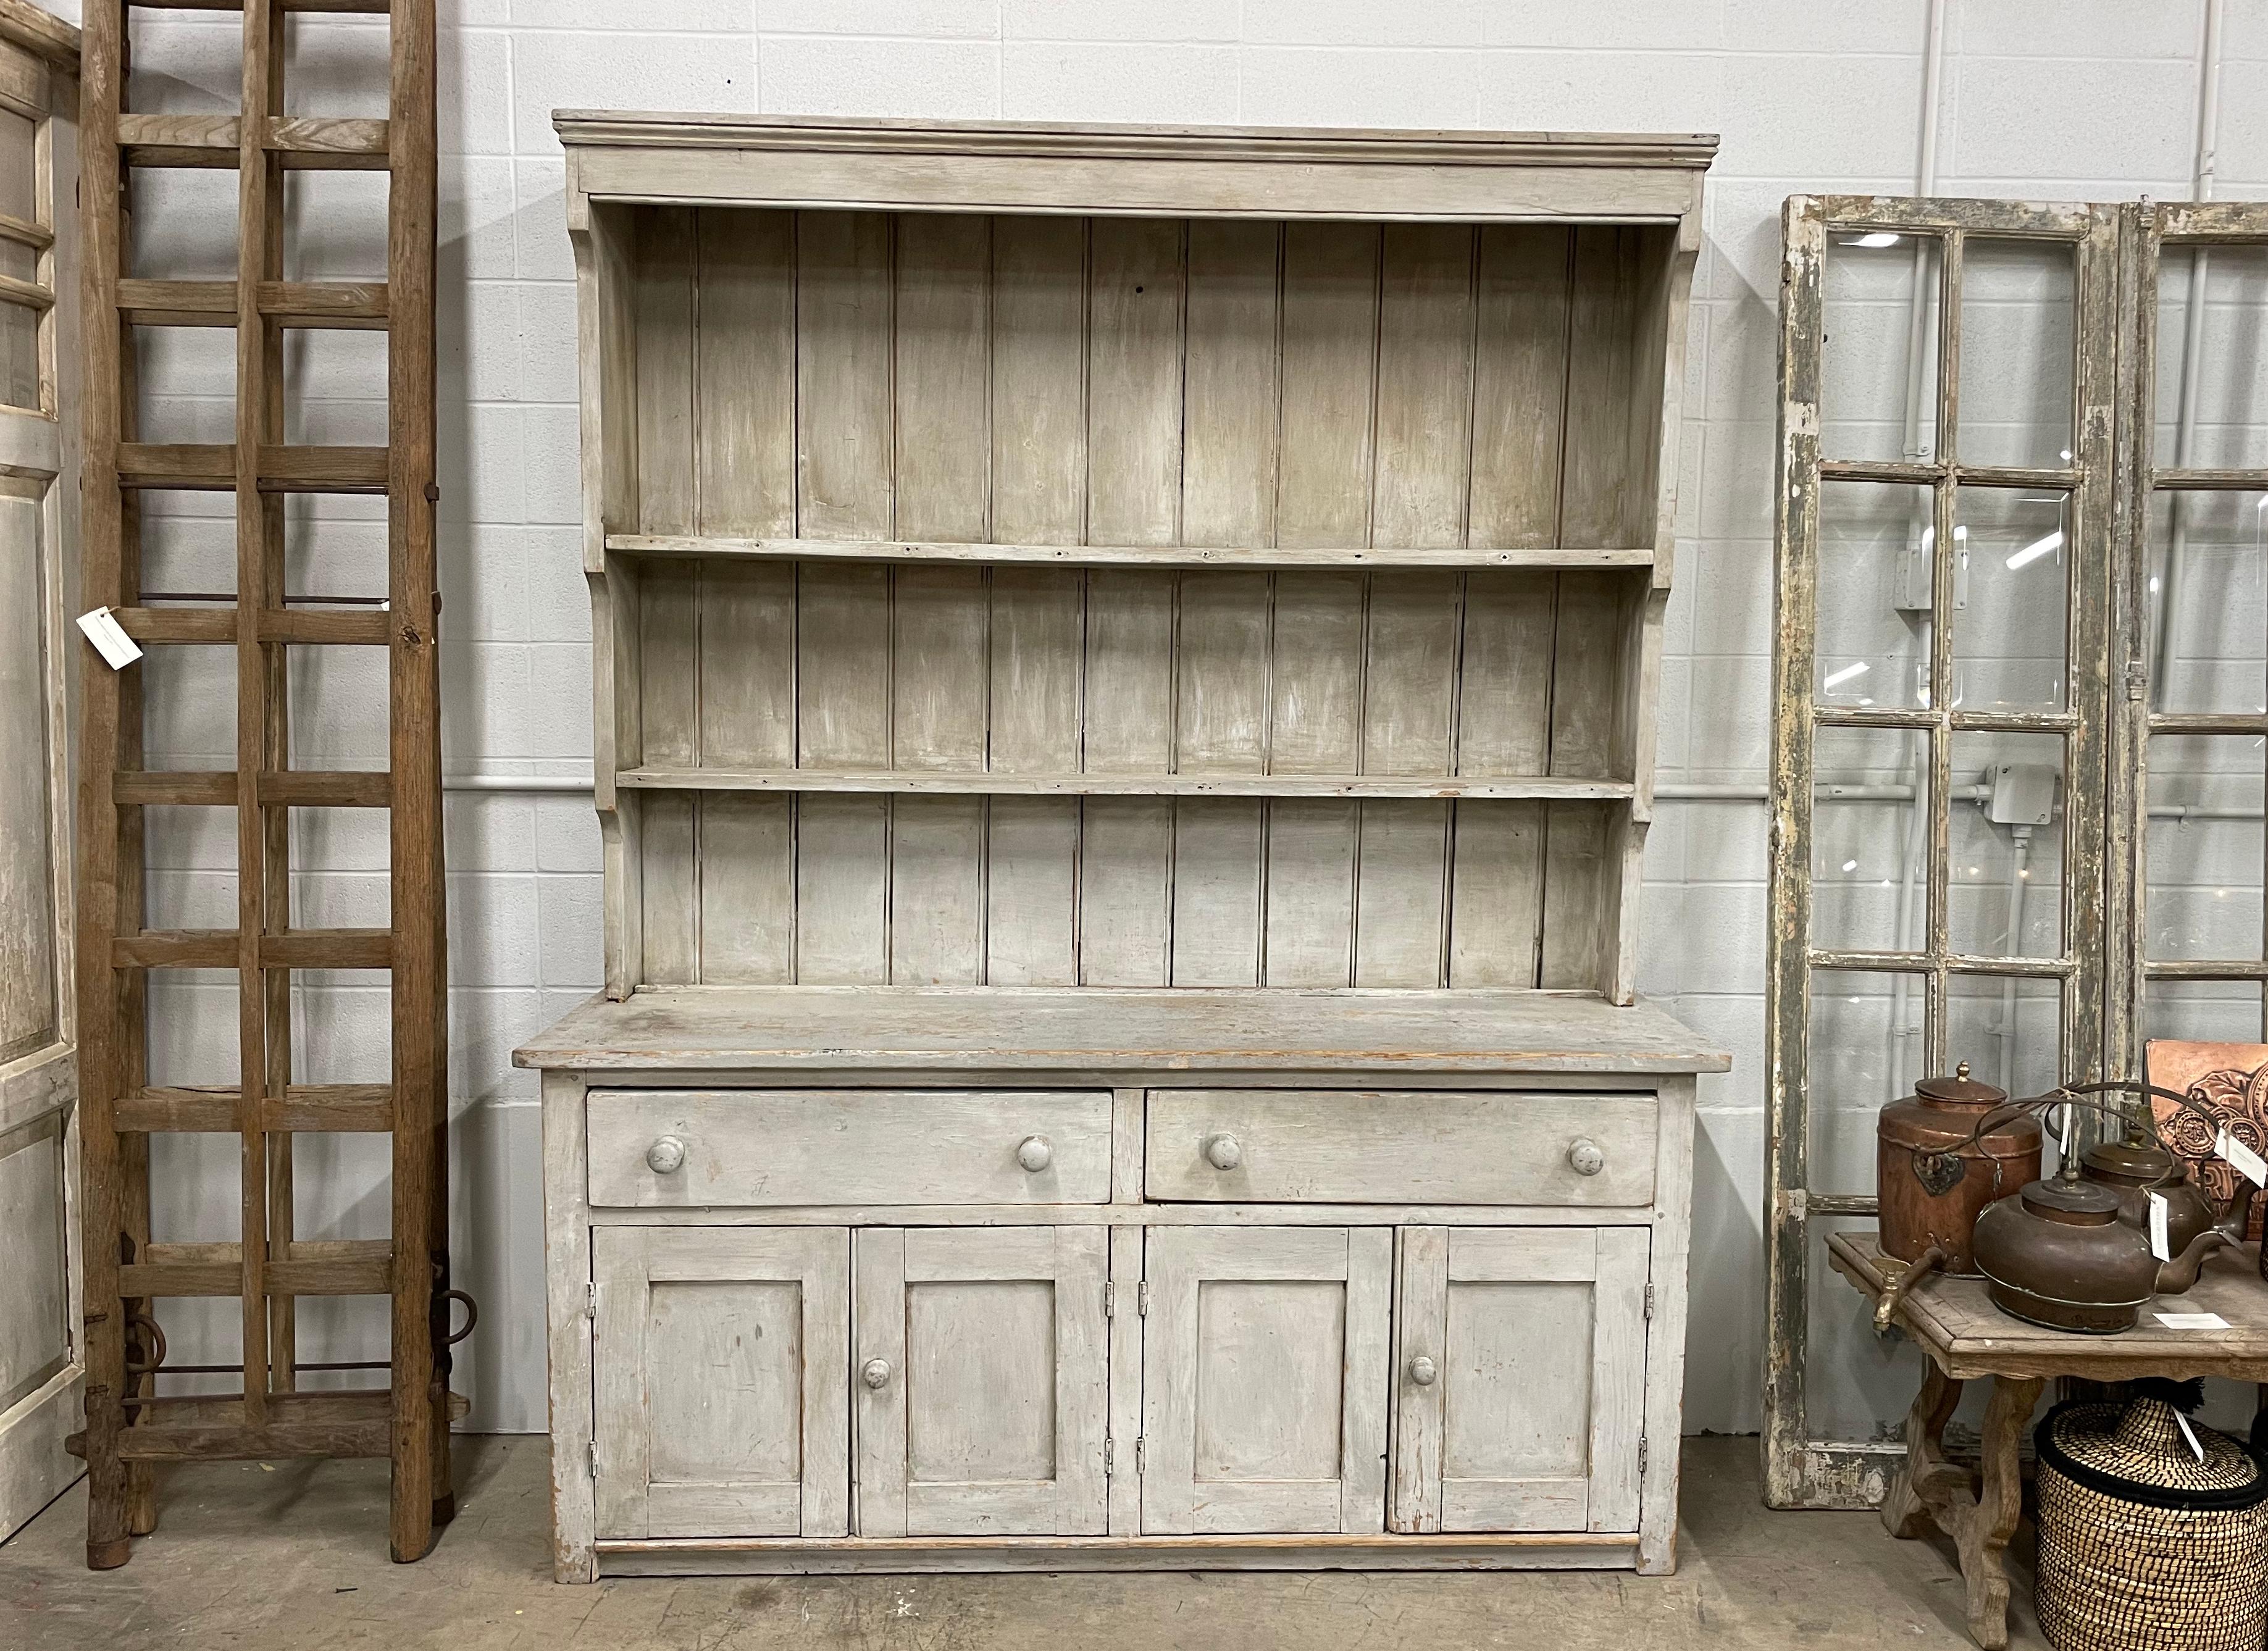 Antique English pine potboard dresser with old paint. It has plenty of storage with 2 double cupboard doors below 2 drawers. Lovely old wooden pulls typical of the period.

This is a very simple farmhouse design that works well in both period and